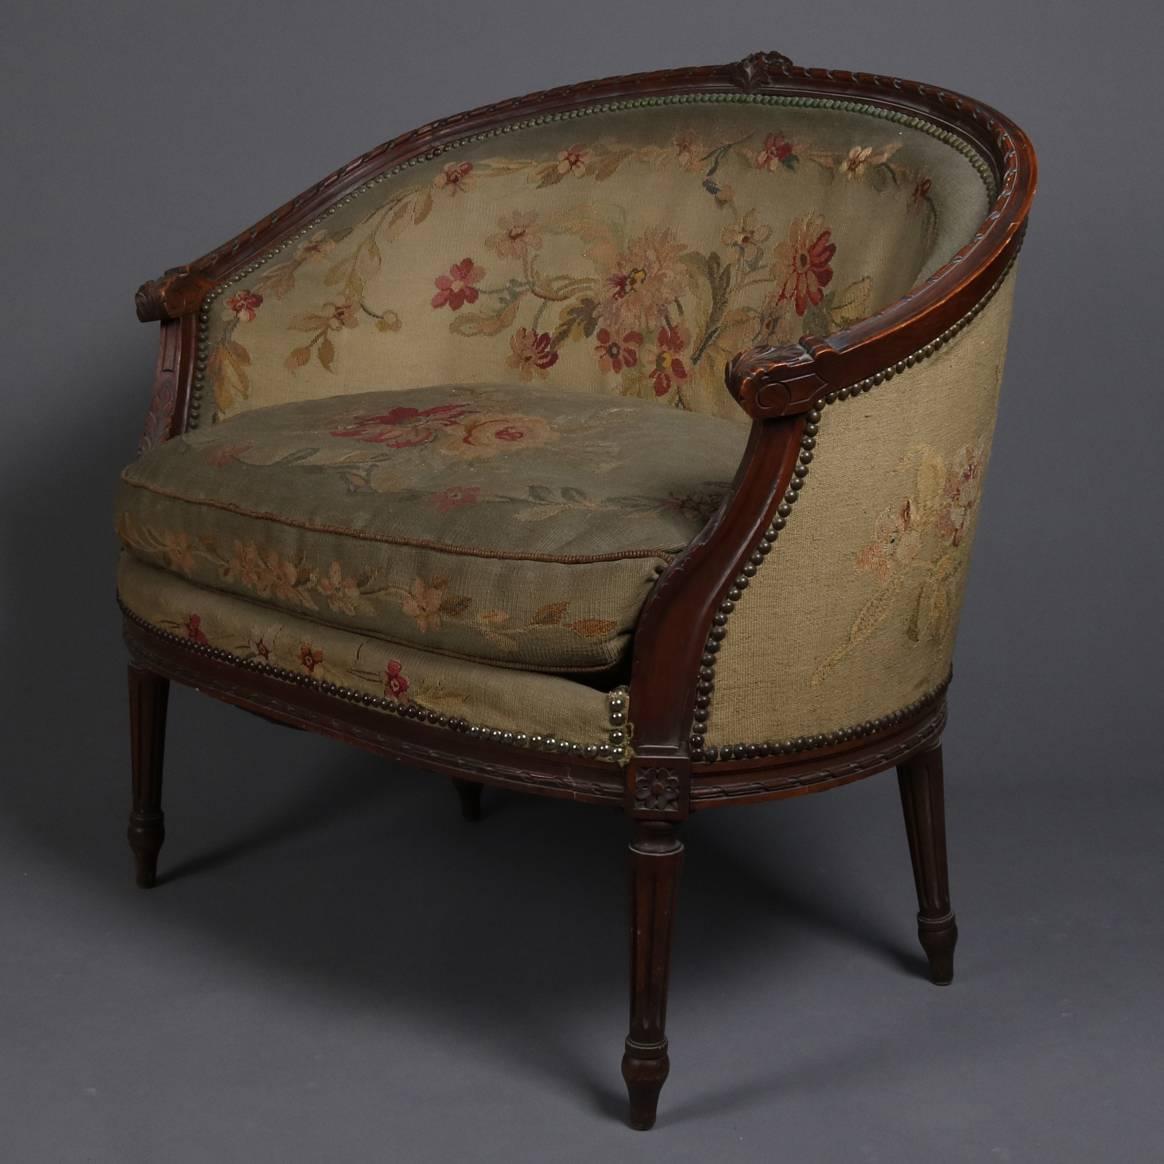 French Louis XVI Style Mahogany and Needlepoint Upholstery Settee, 19th Century 1